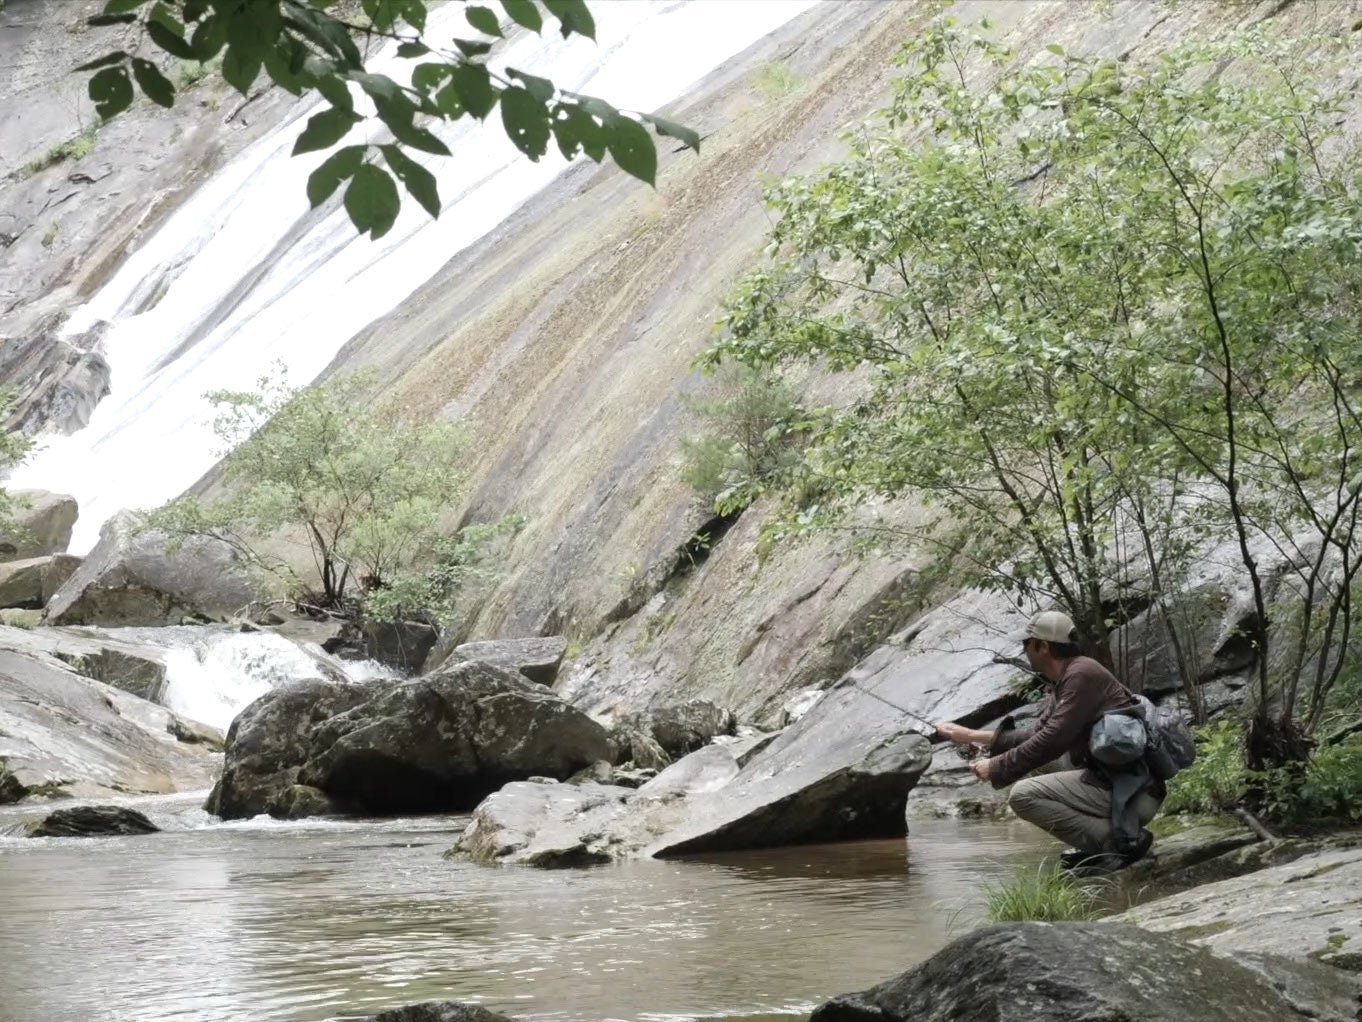 An angler fishing for trout near a waterfall and river.